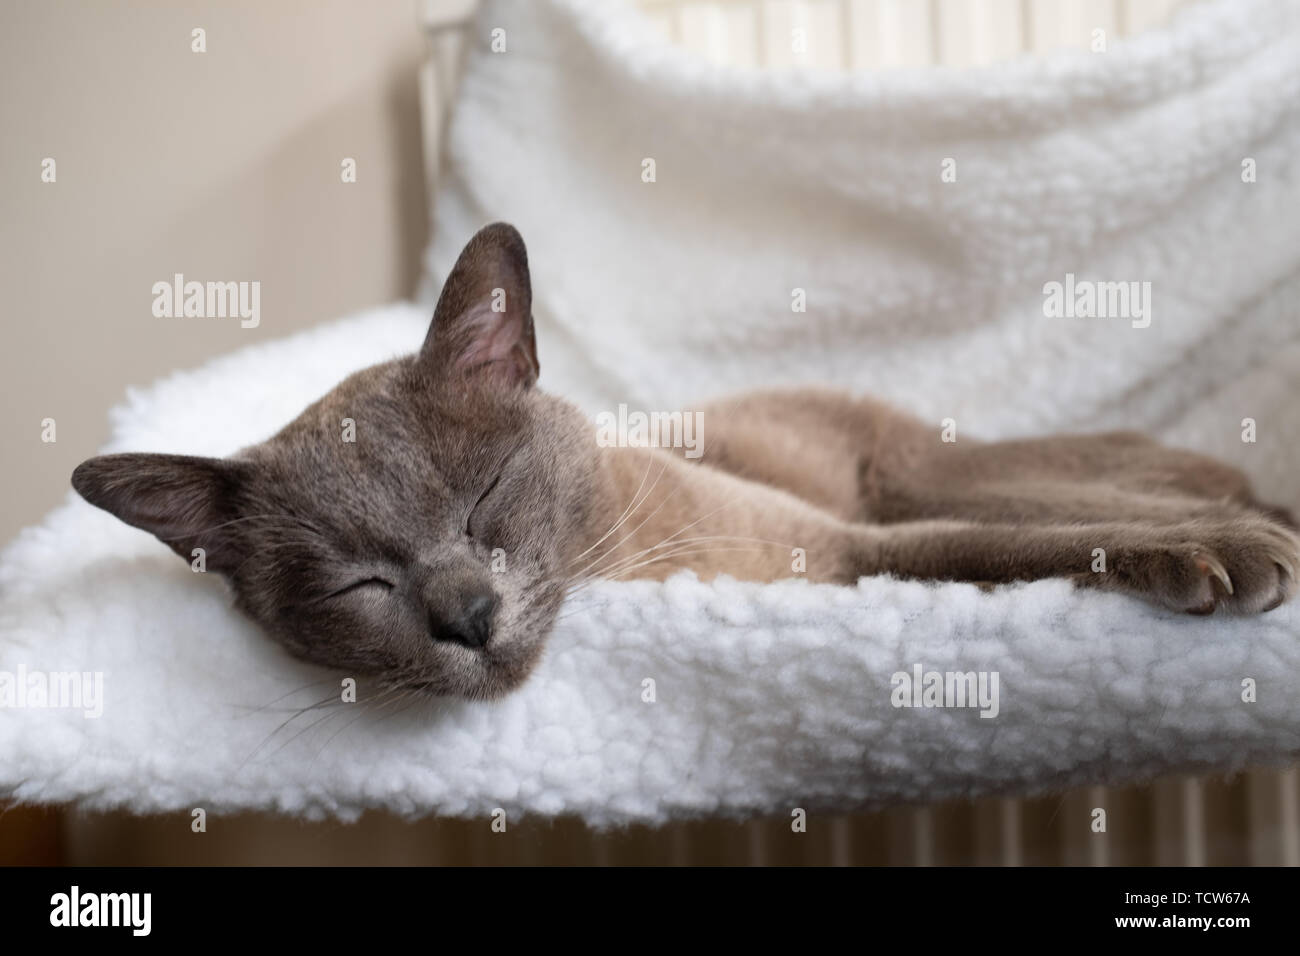 A close up of a beautiful domestic cat sleeping in a small white hammock attached to a radiator, nobody in the image Stock Photo